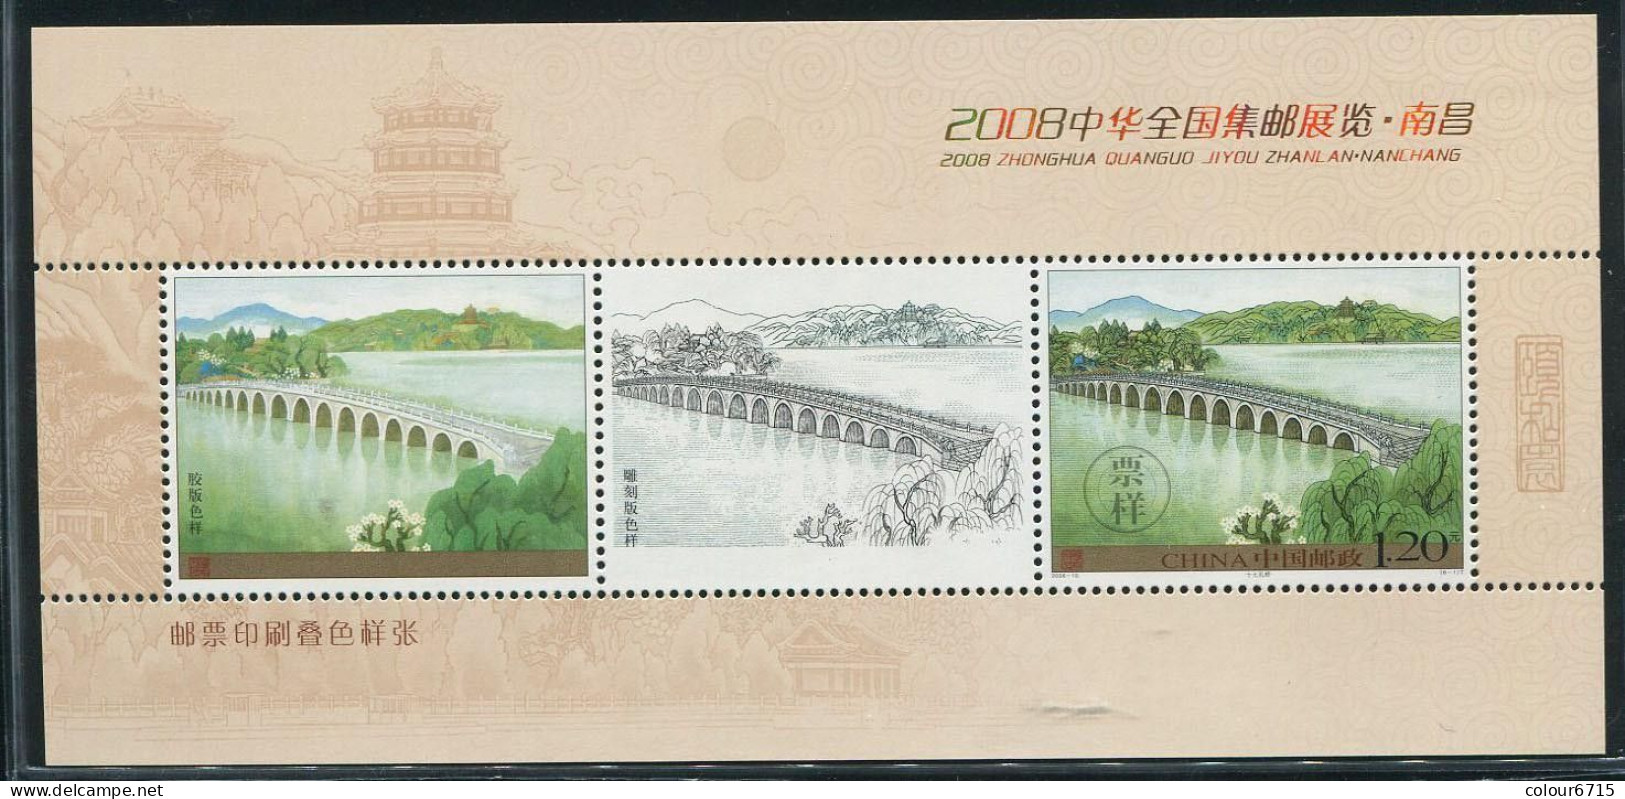 China 2008 Proof Specimen — National Philatelic Exhibition,Nanchang/ New Summer Palace Stamp MS/Block MNH - Ensayos & Reimpresiones